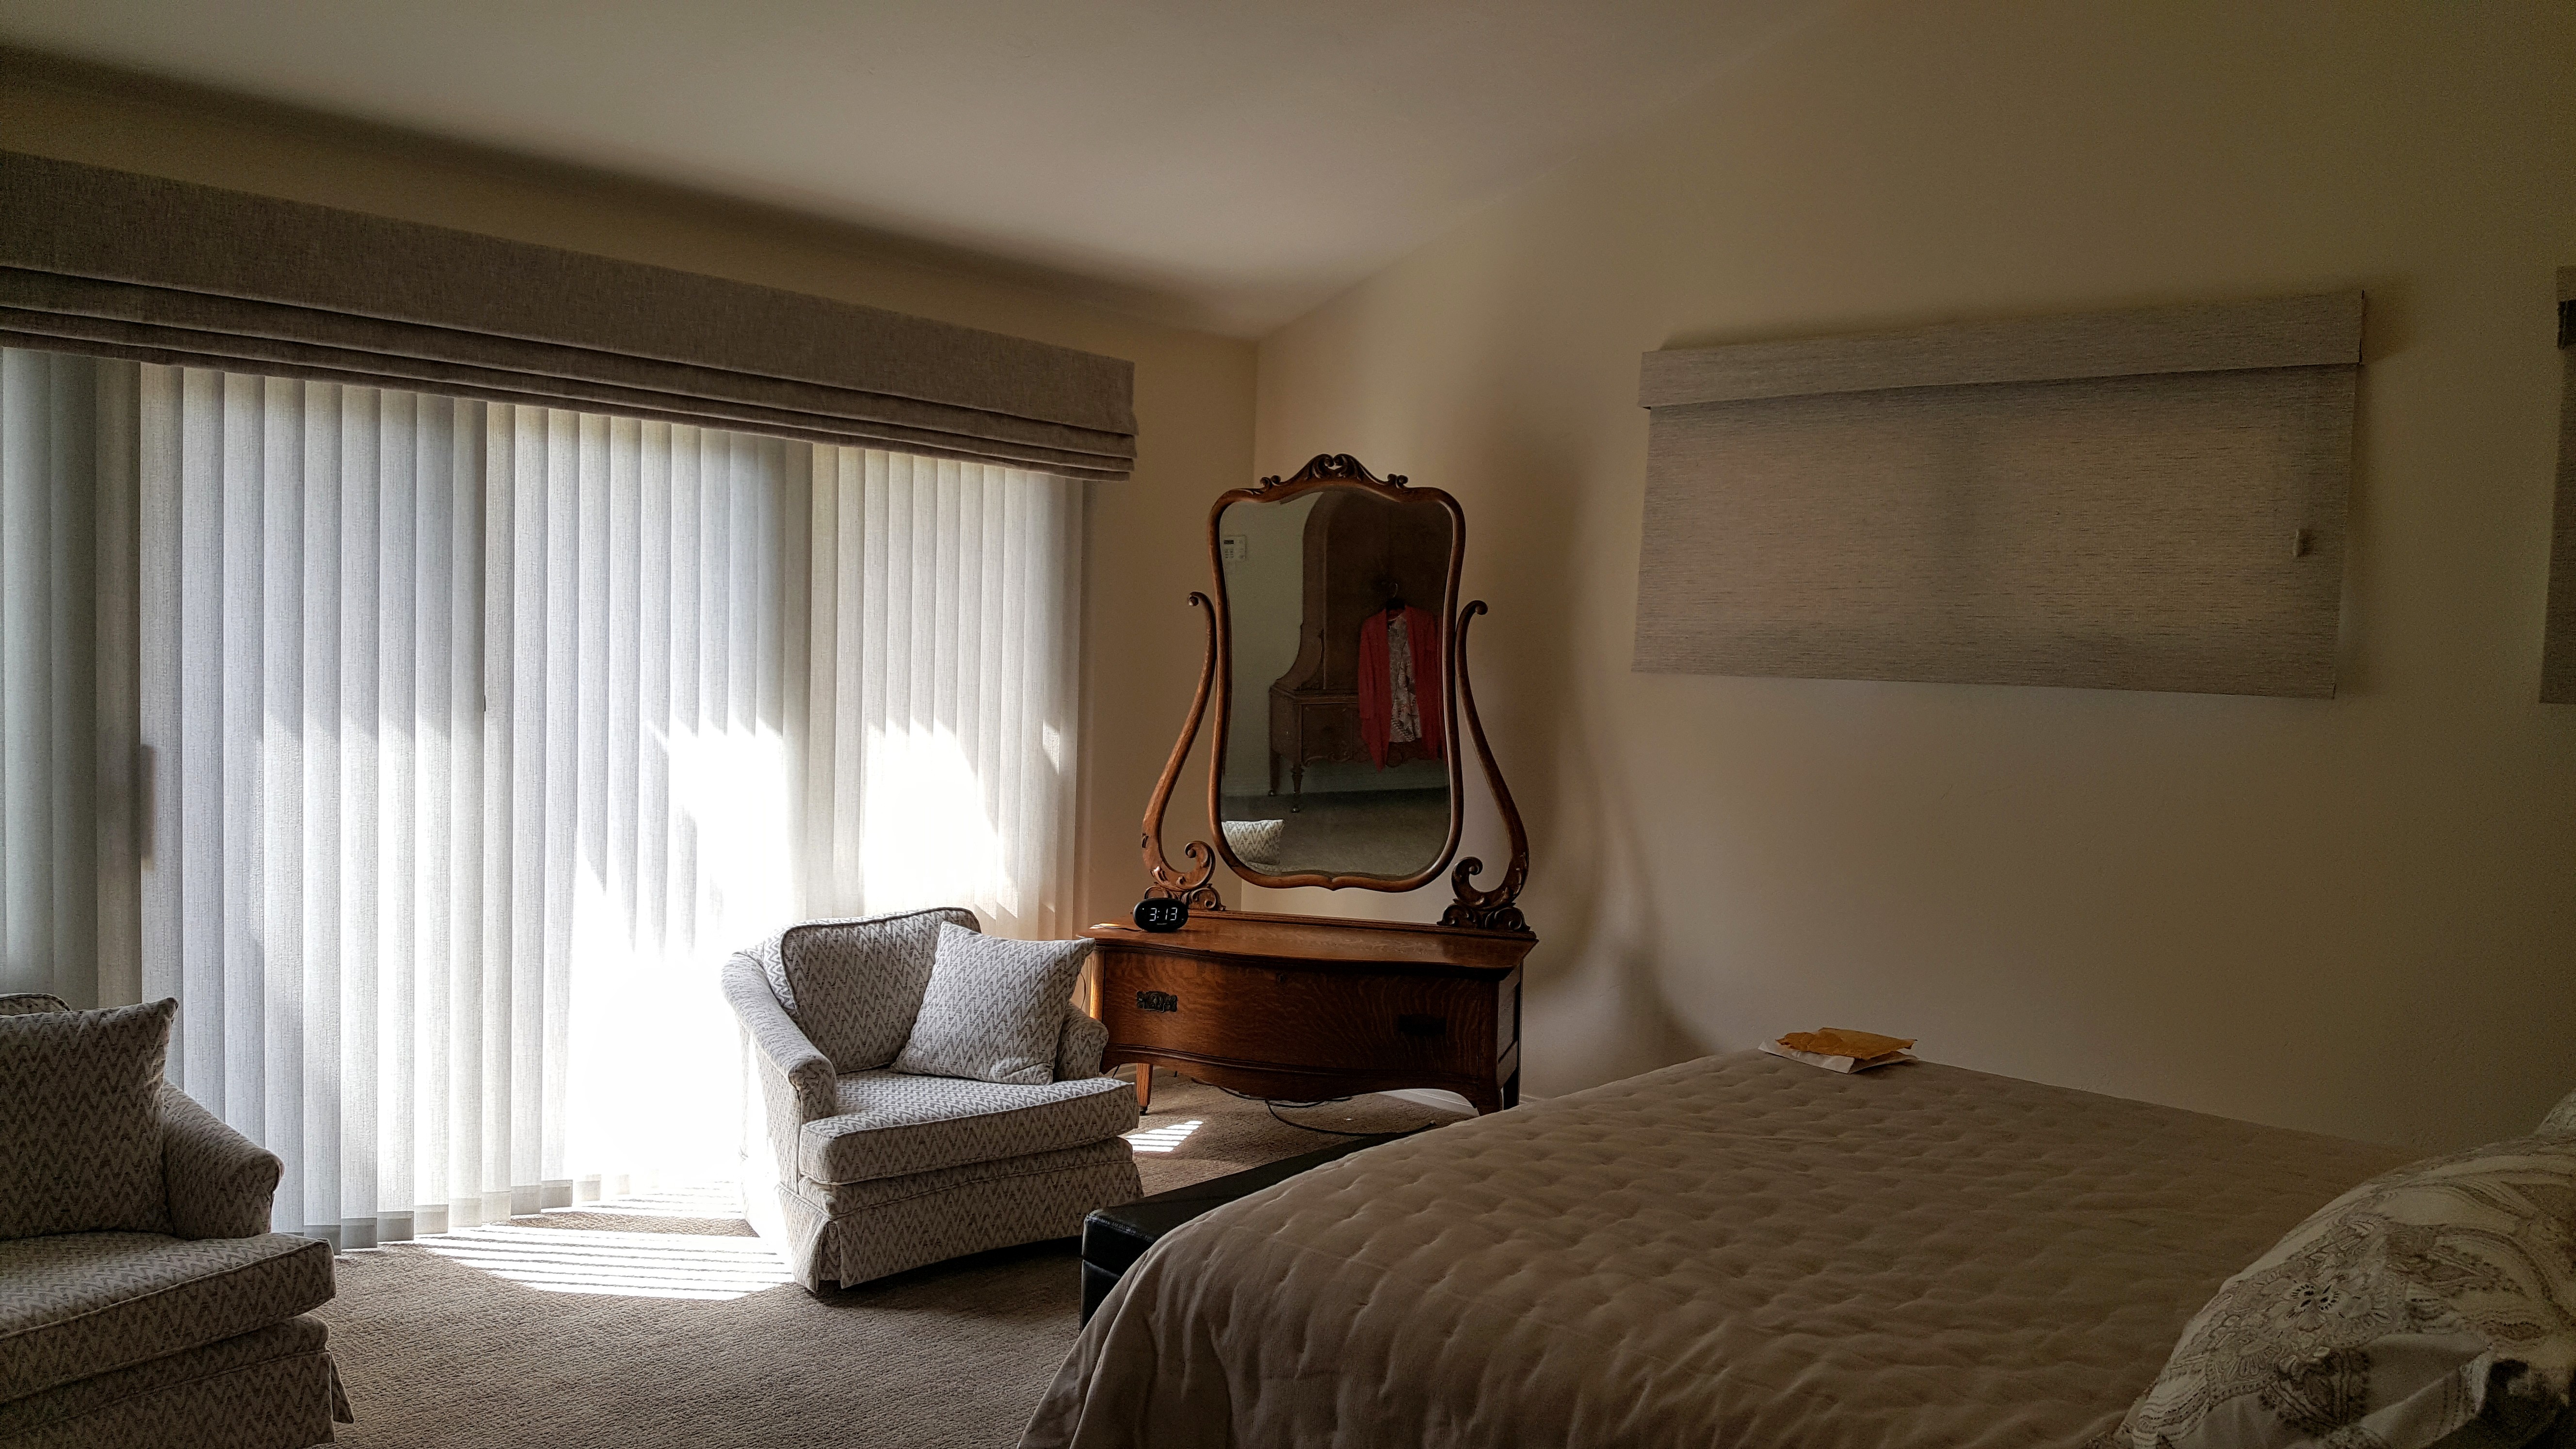 Large Roman Valance over vertical coordinates perfectly with Woven Natural Roman shades in a master bedroom in Point Loma